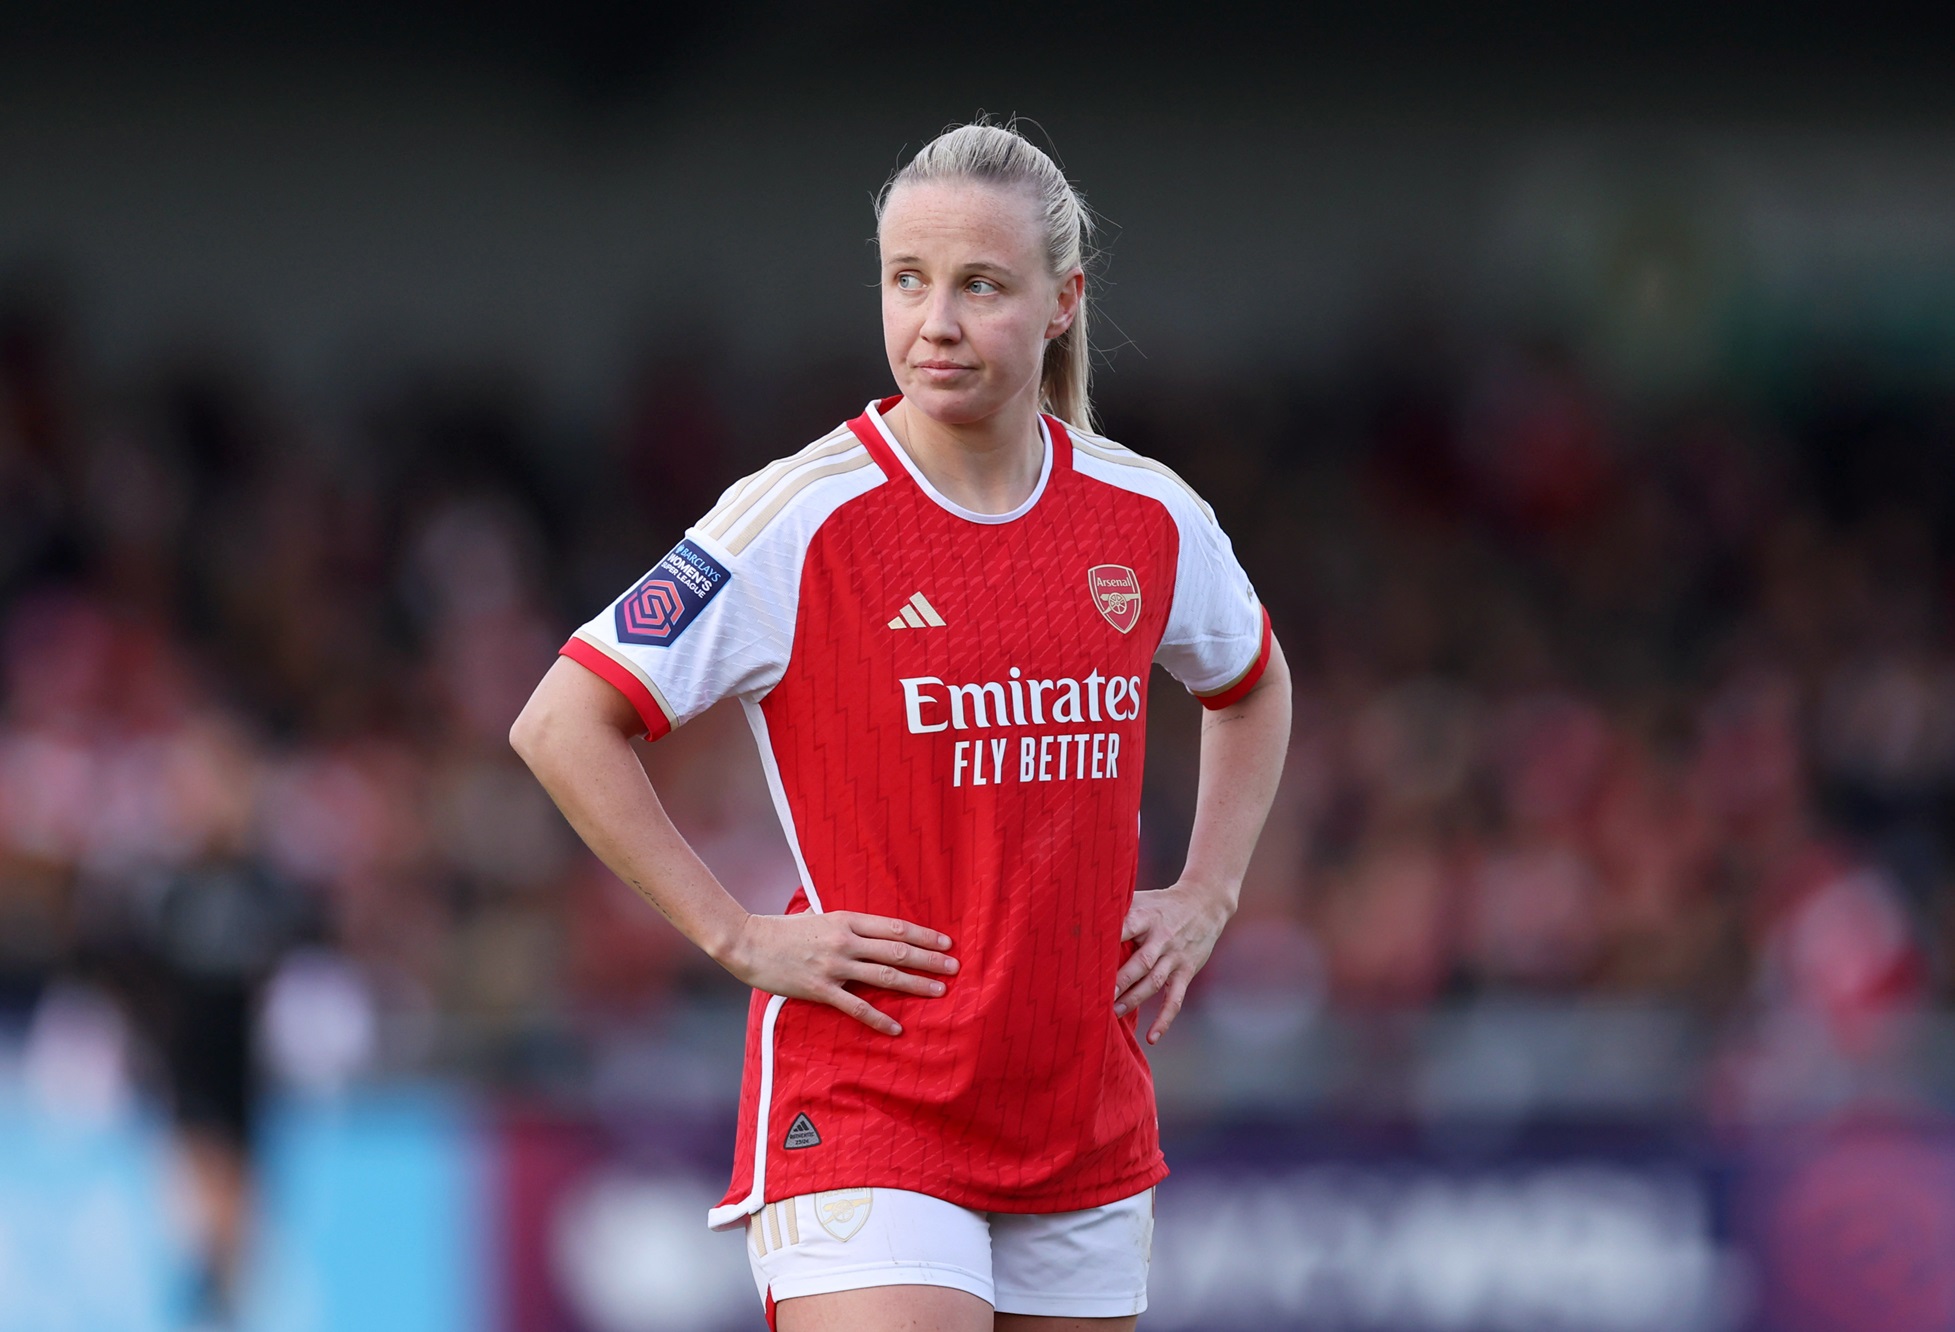 Eidevall refuses to concede title after Arsenal Women suffer shock West Ham defeat